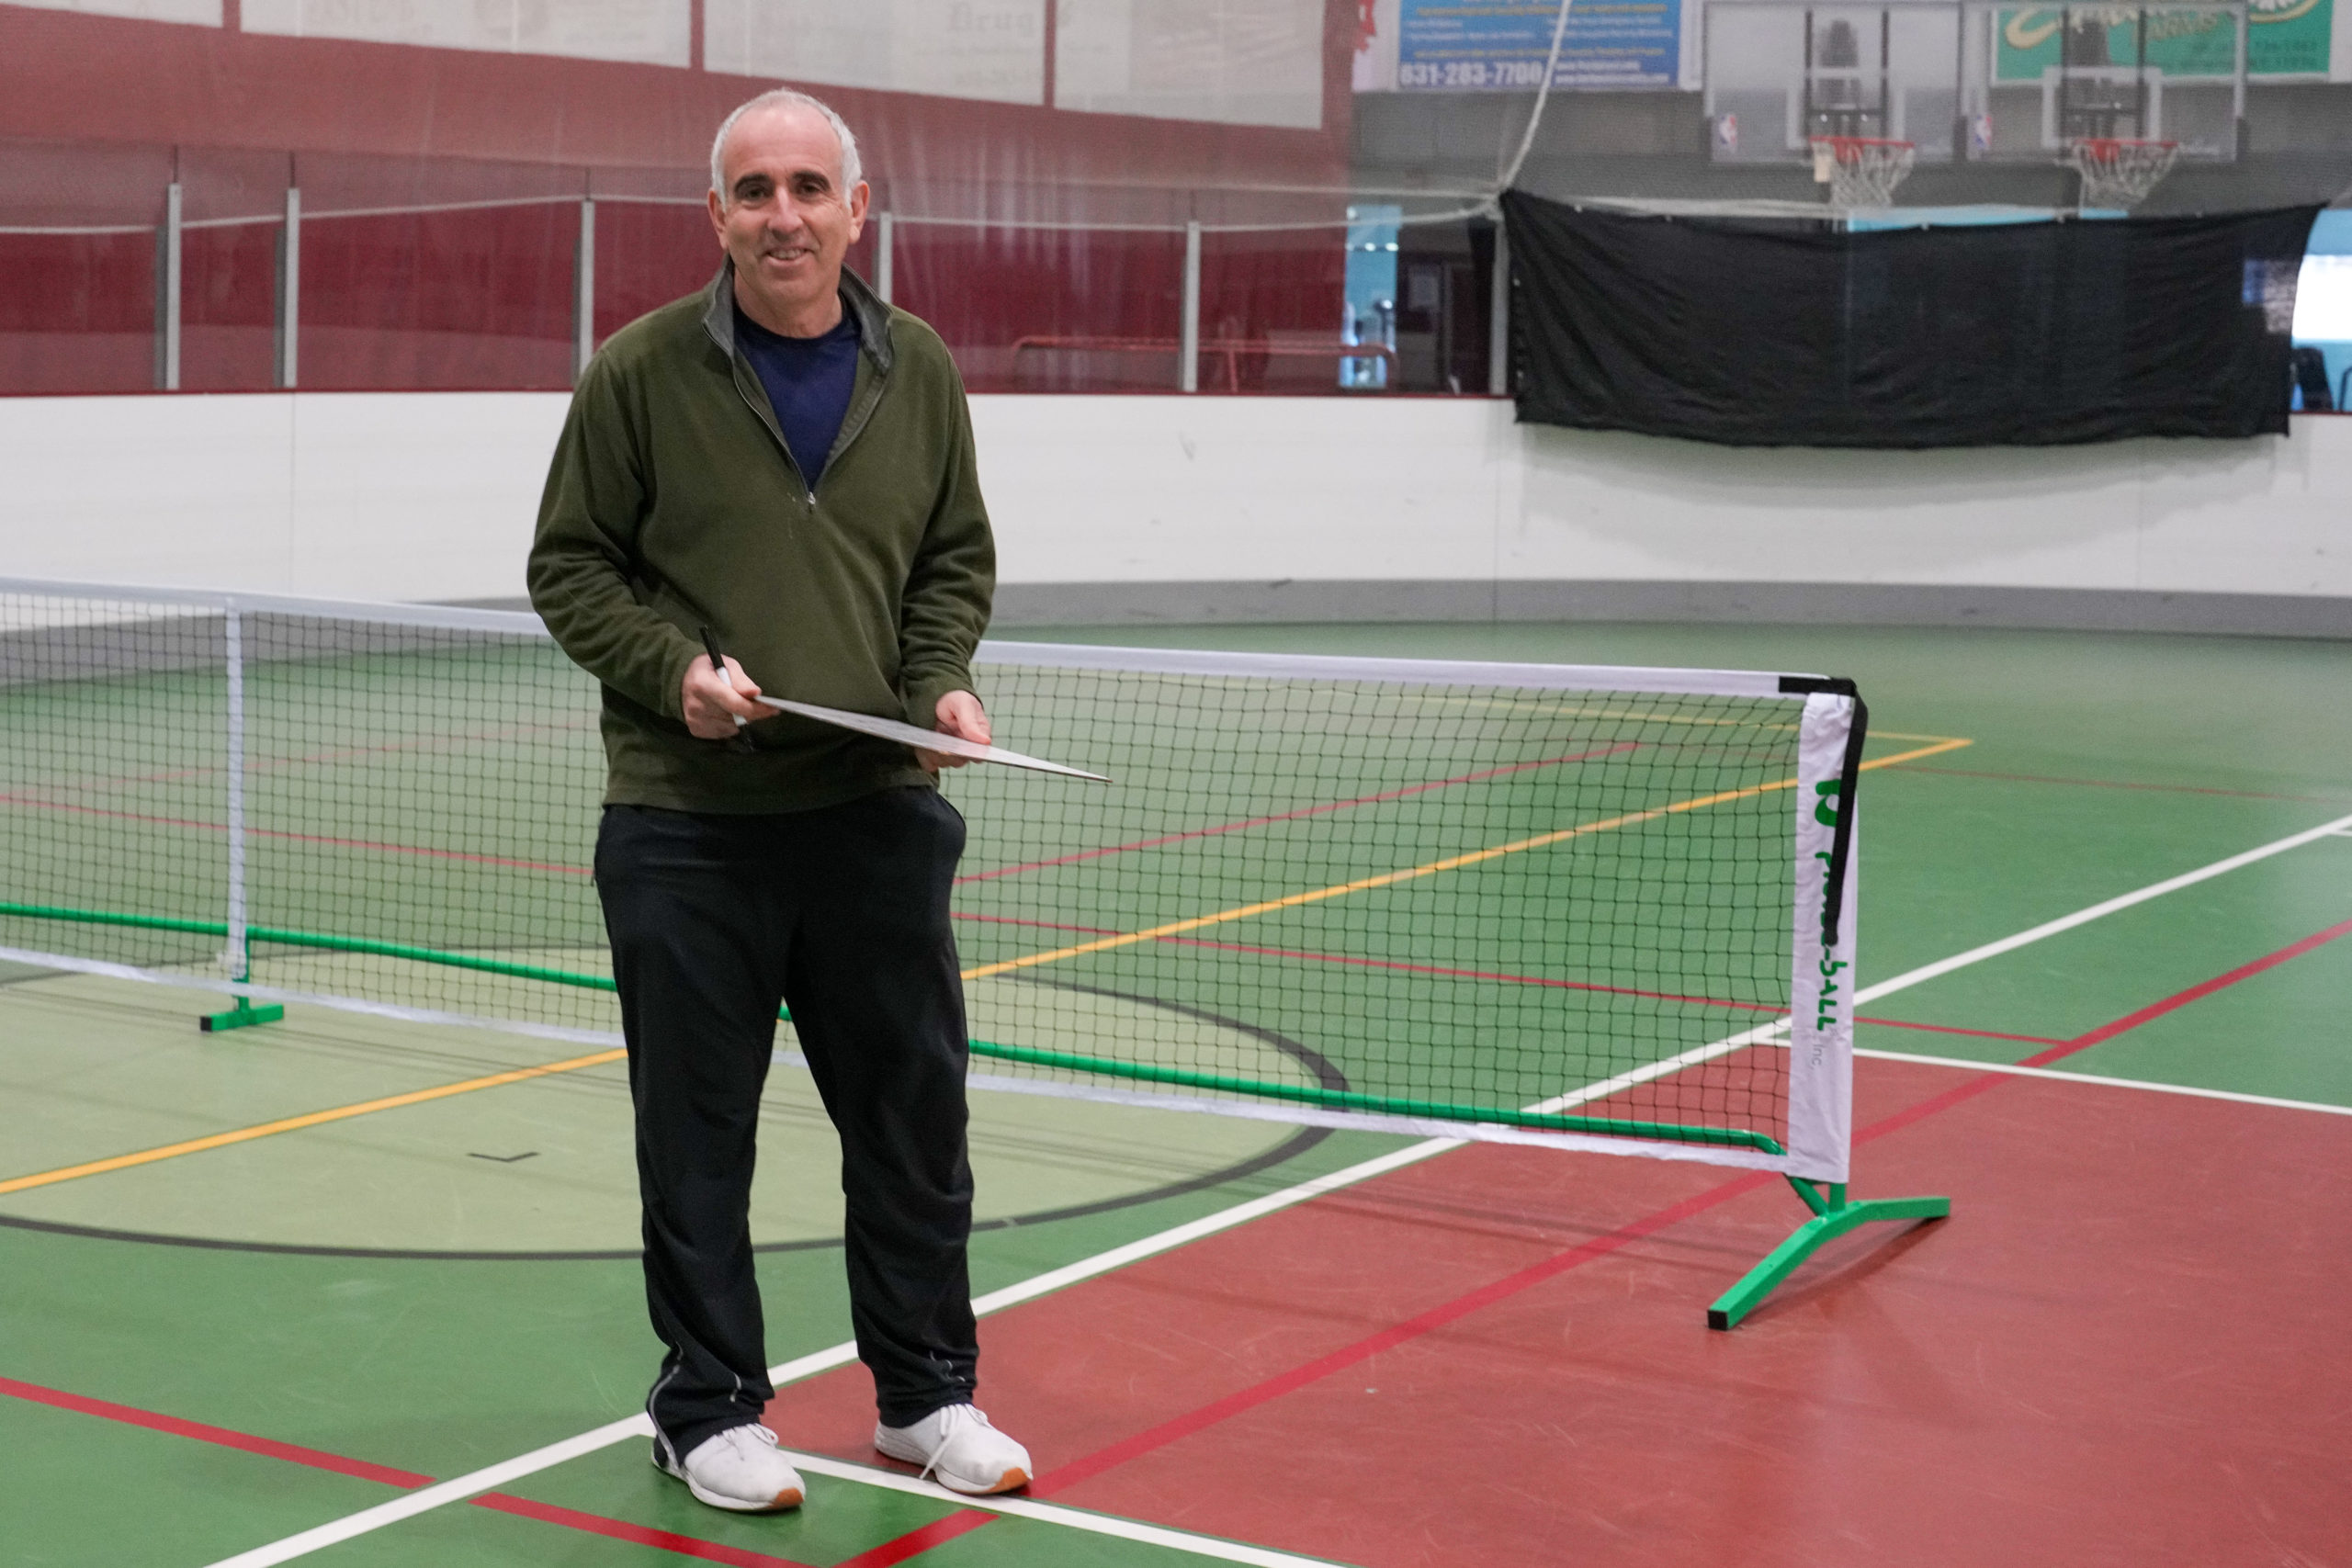 Southampton Town Supervisor Jay Schneiderman, an avid pickleball player himself, took part in Saturday's event.